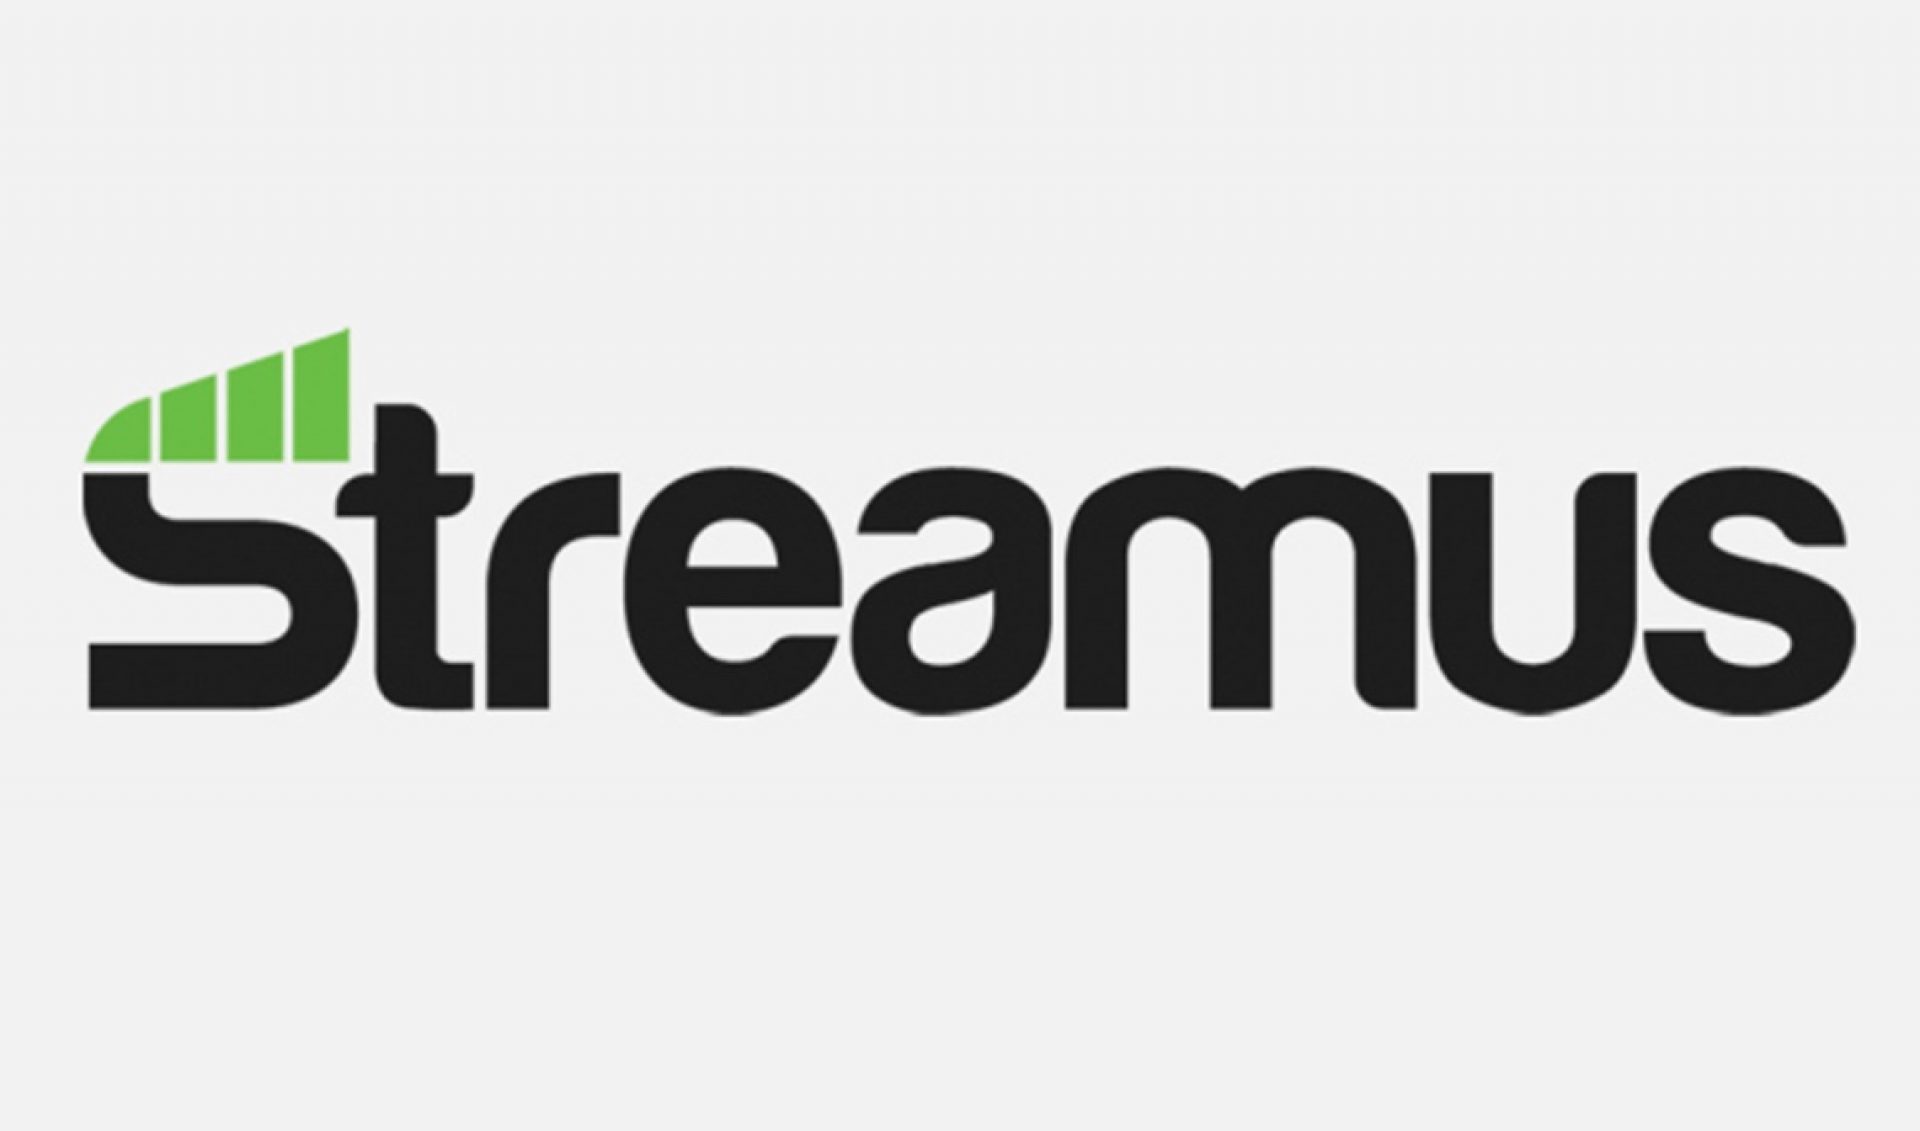 After Issues With YouTube, Musical Chrome Extension Streamus Taken Down